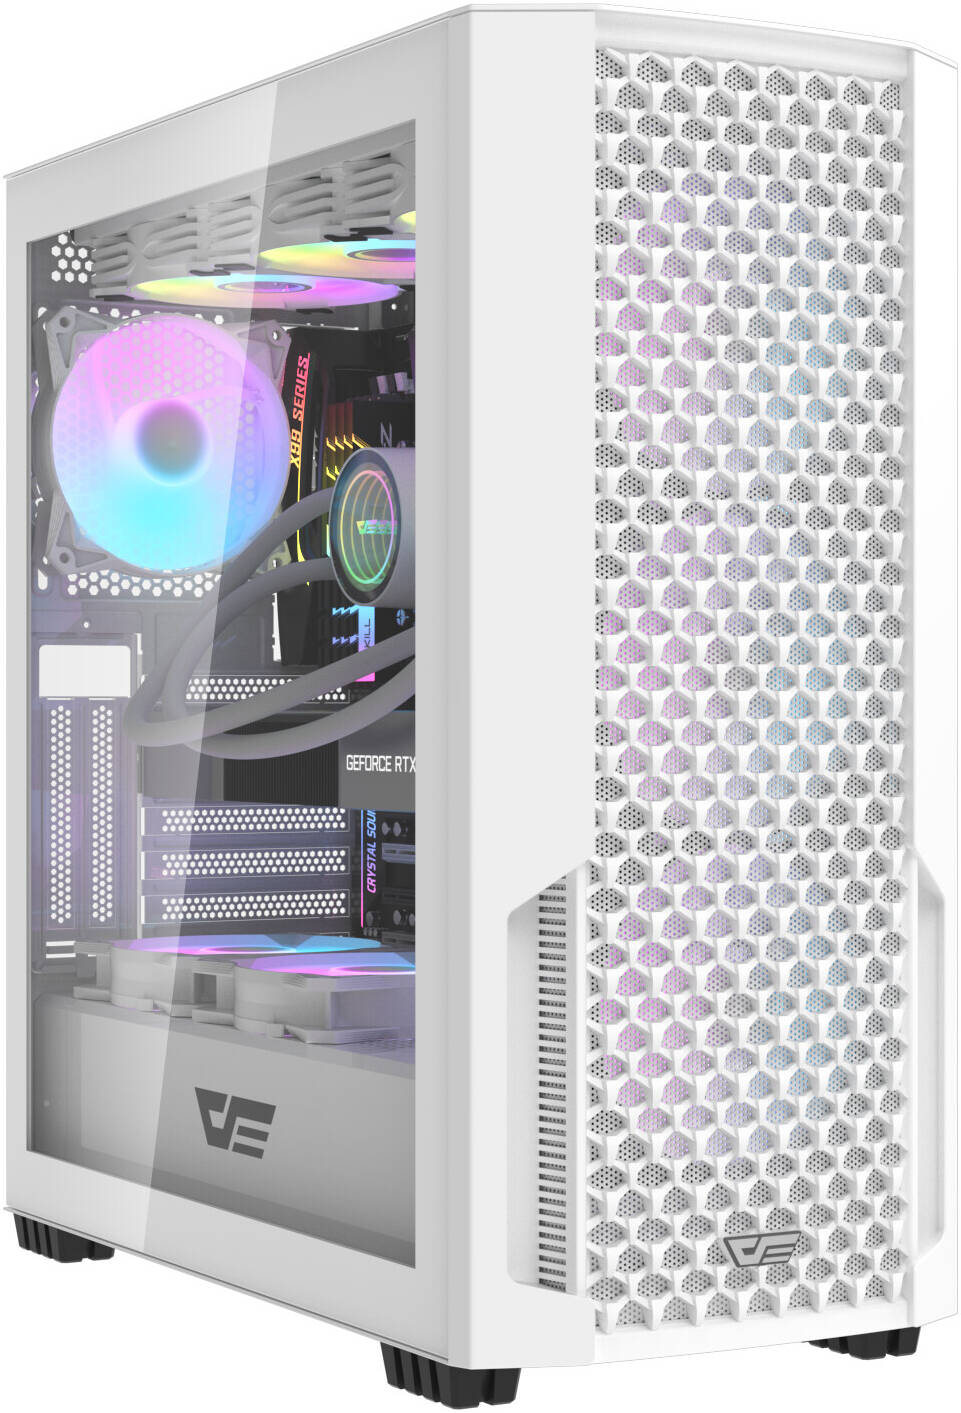 DarkFlash DF2100 ATX Computer Case, 4x Pre-Installed aRGB Fans, Up to 360mm Radiators & 11x 120mm Fans Support, SPCC + ABS + Tempered Glass Materials, 3x USB-A / 3.5mm Audio Jack Port, White